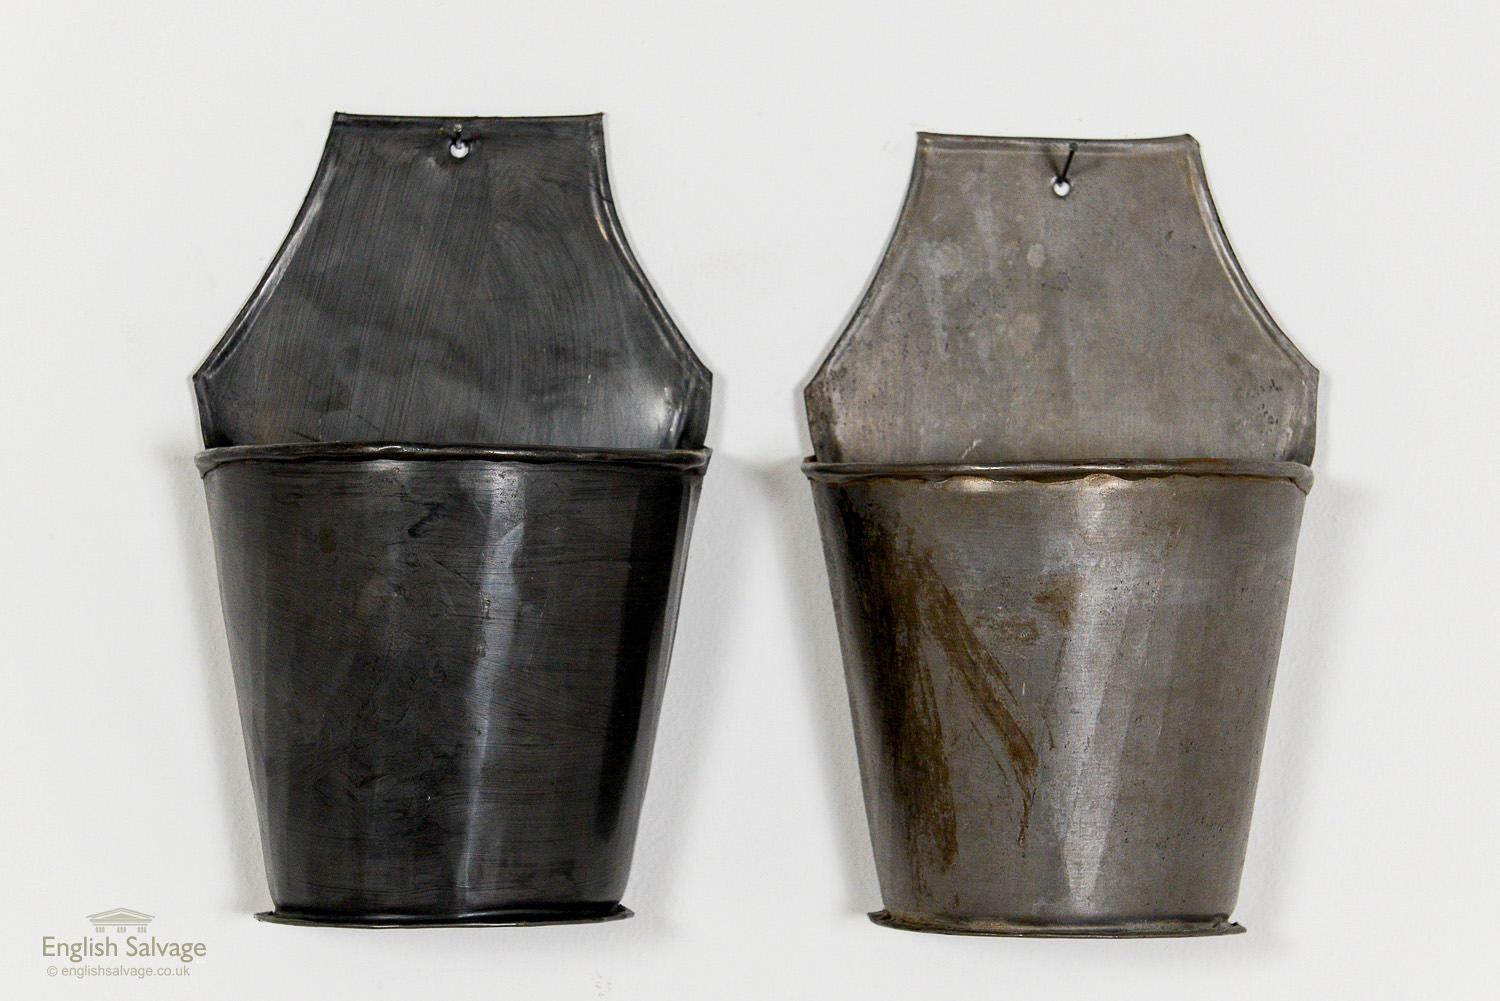 Semi circular galvanised planters / storage / display buckets with a flat back and hole for wall hanging. Approximate size of each stated below, there will be some slight variation as each is slightly different.